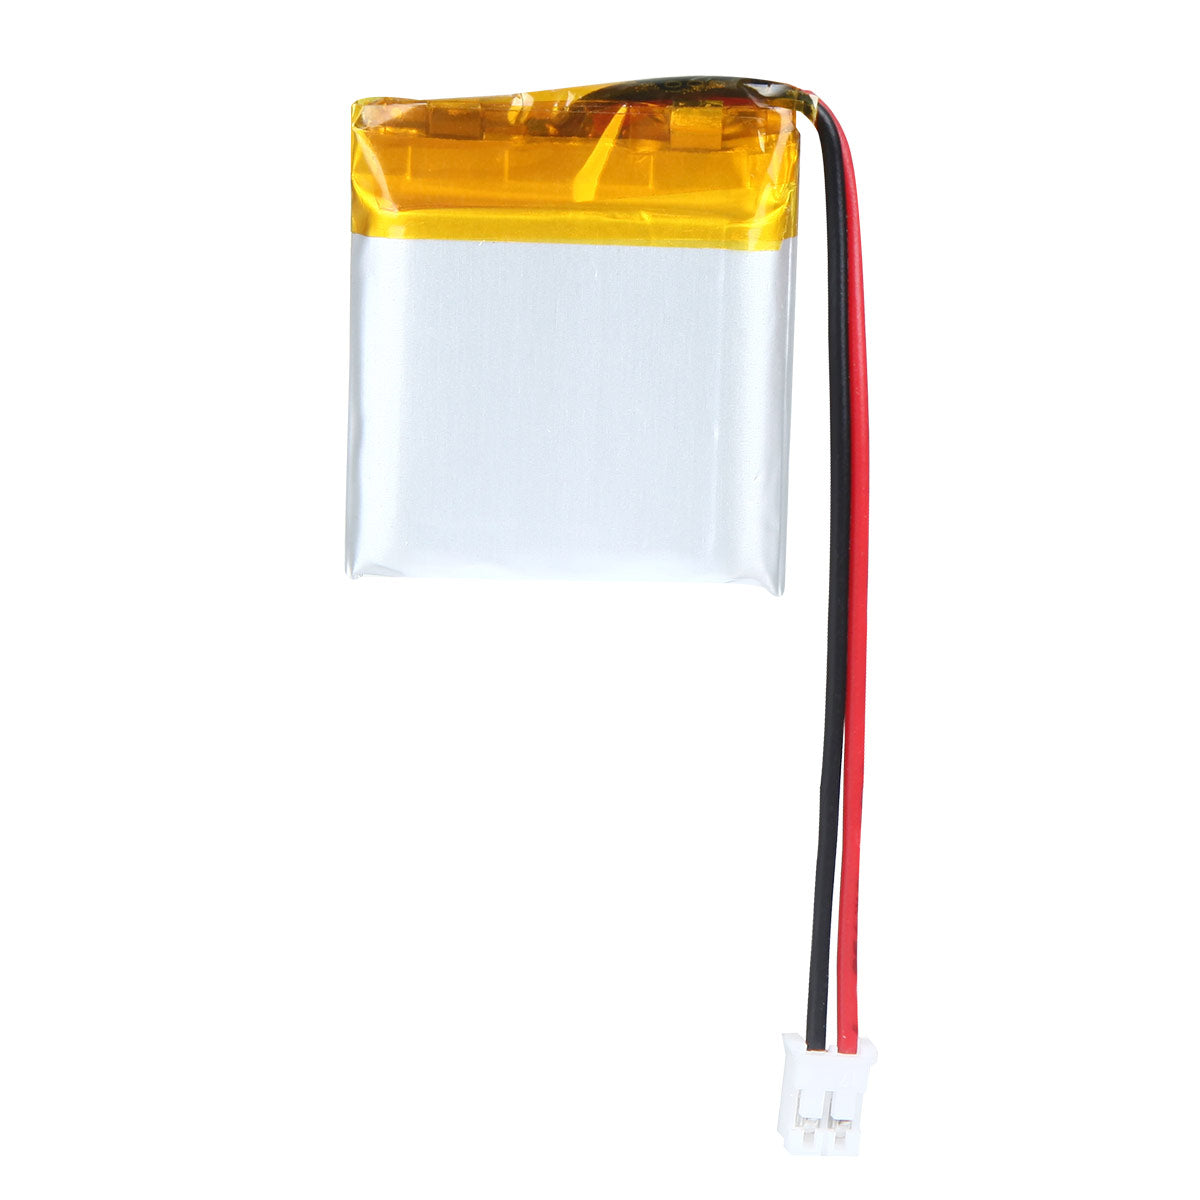 YDL 3.7V 380mAh 552730 Rechargeable Polymer Lithium-Ion Battery Length 32mm